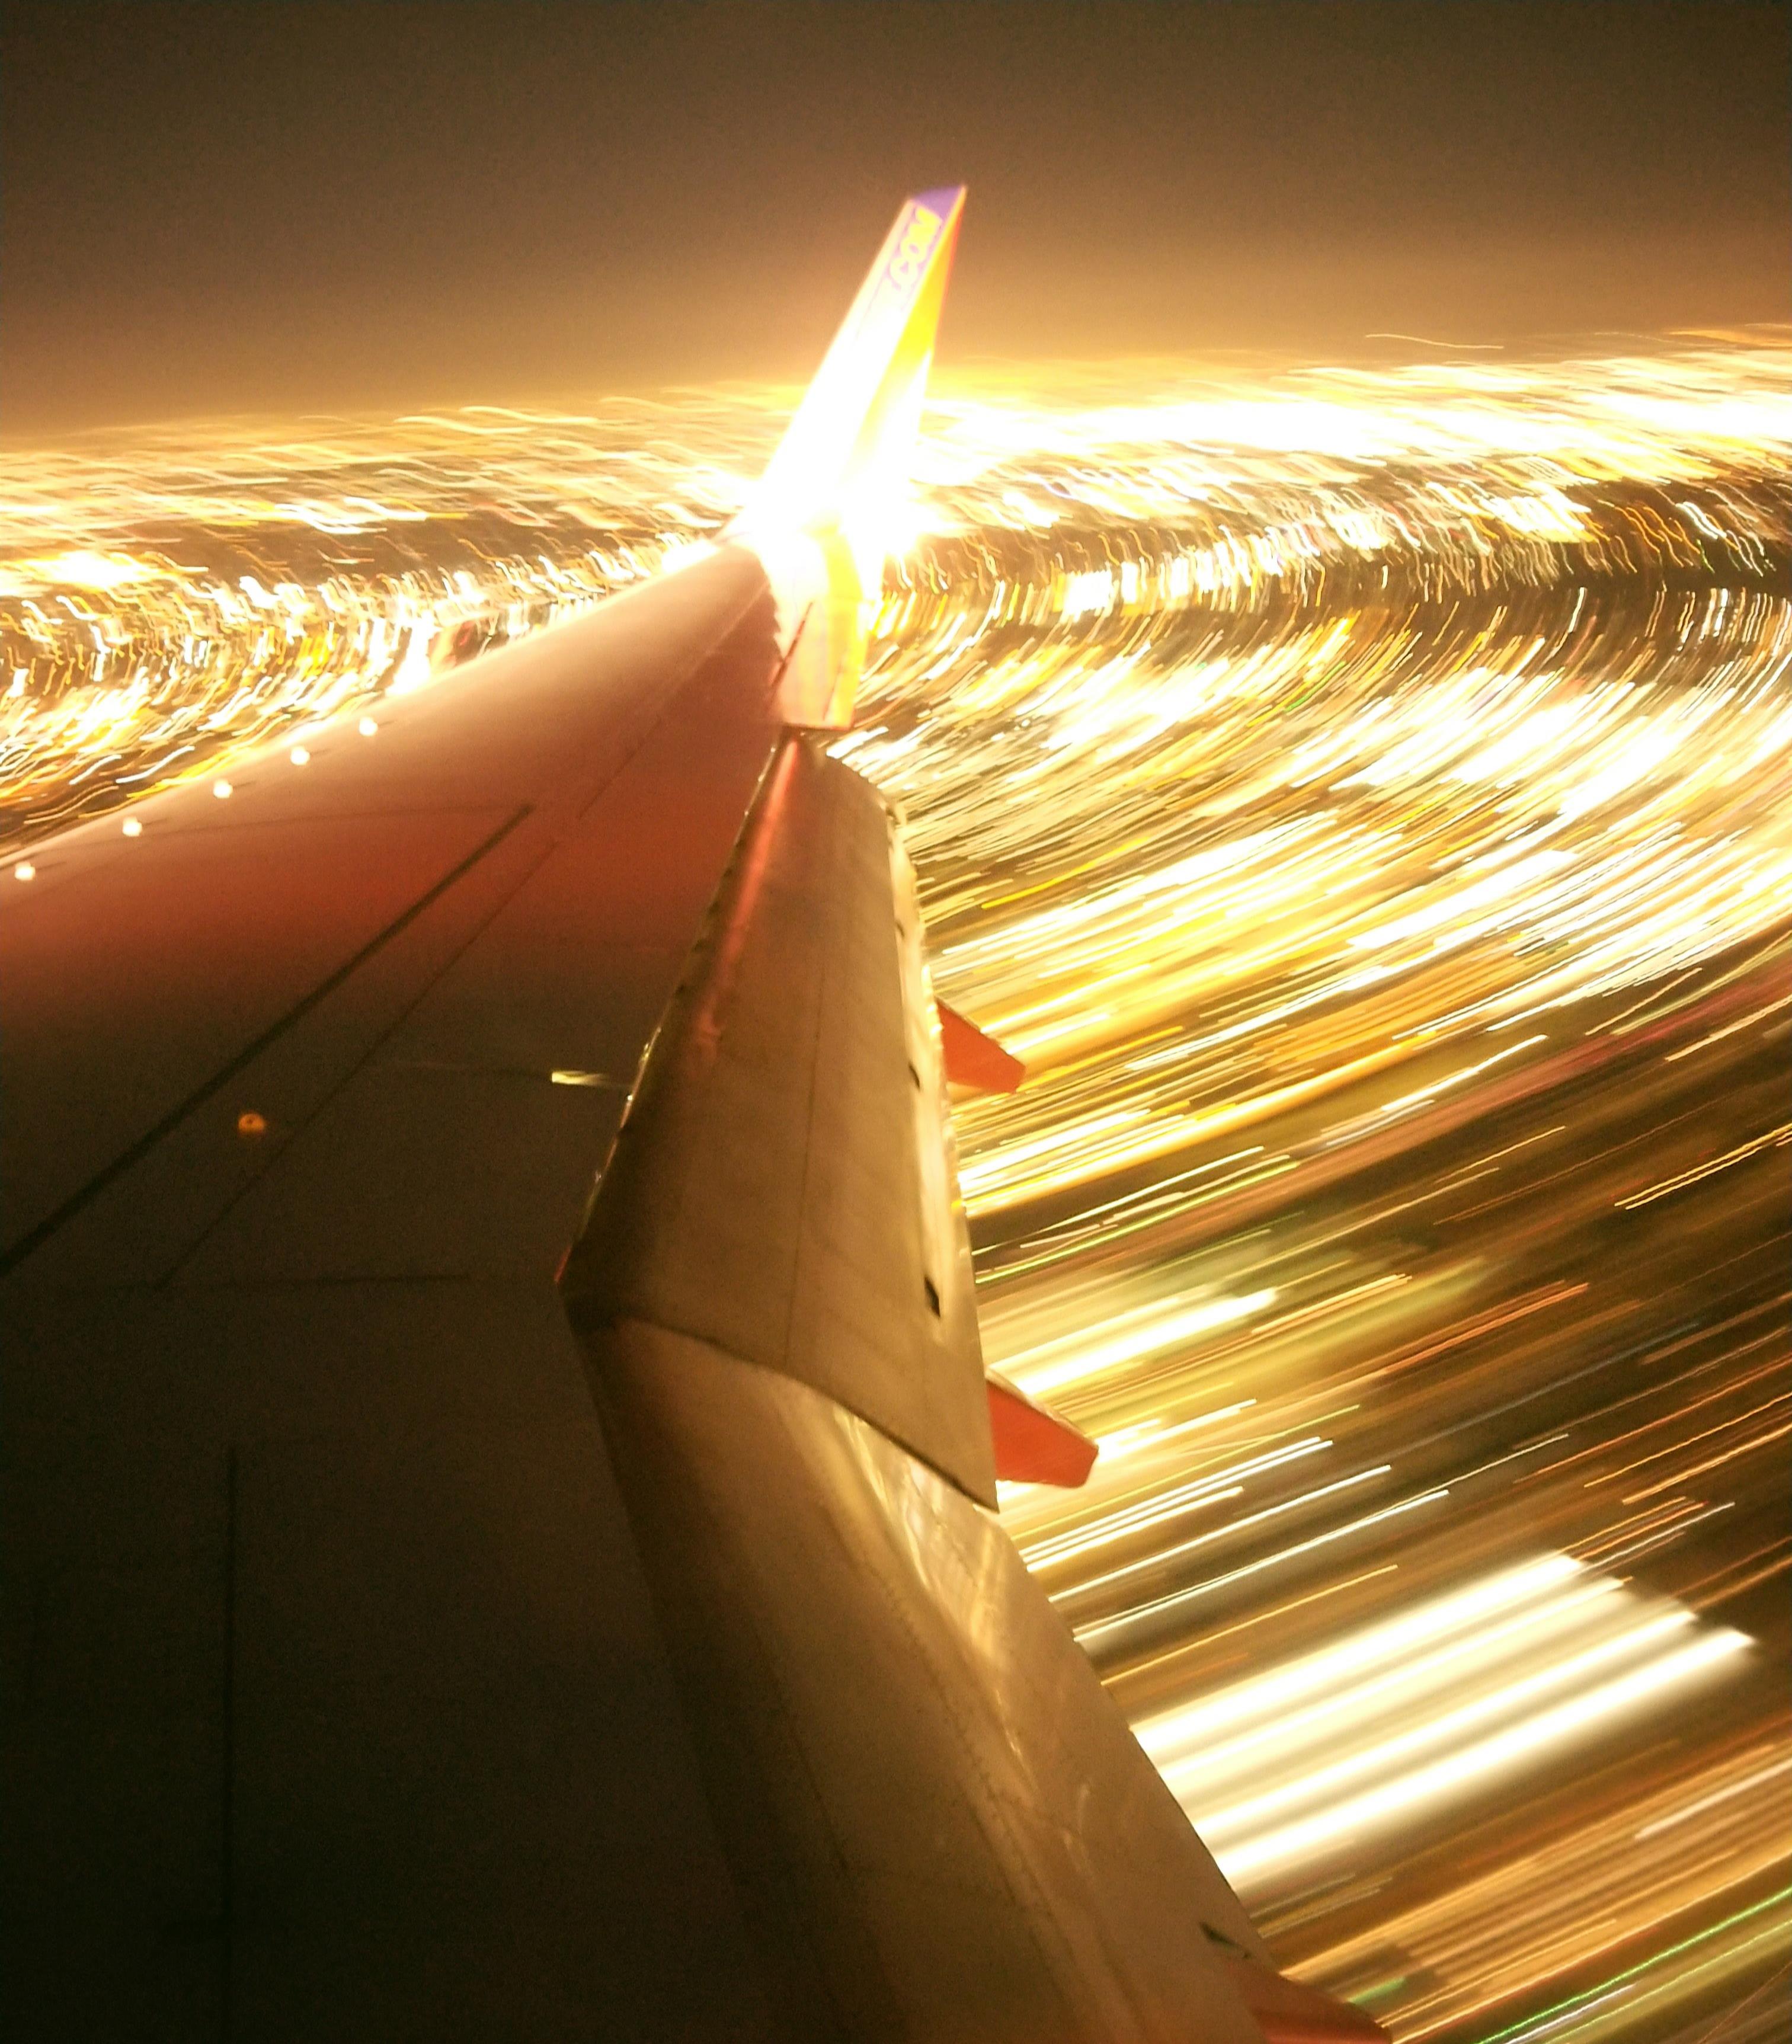 Took a long exposure shot on my flight while turning